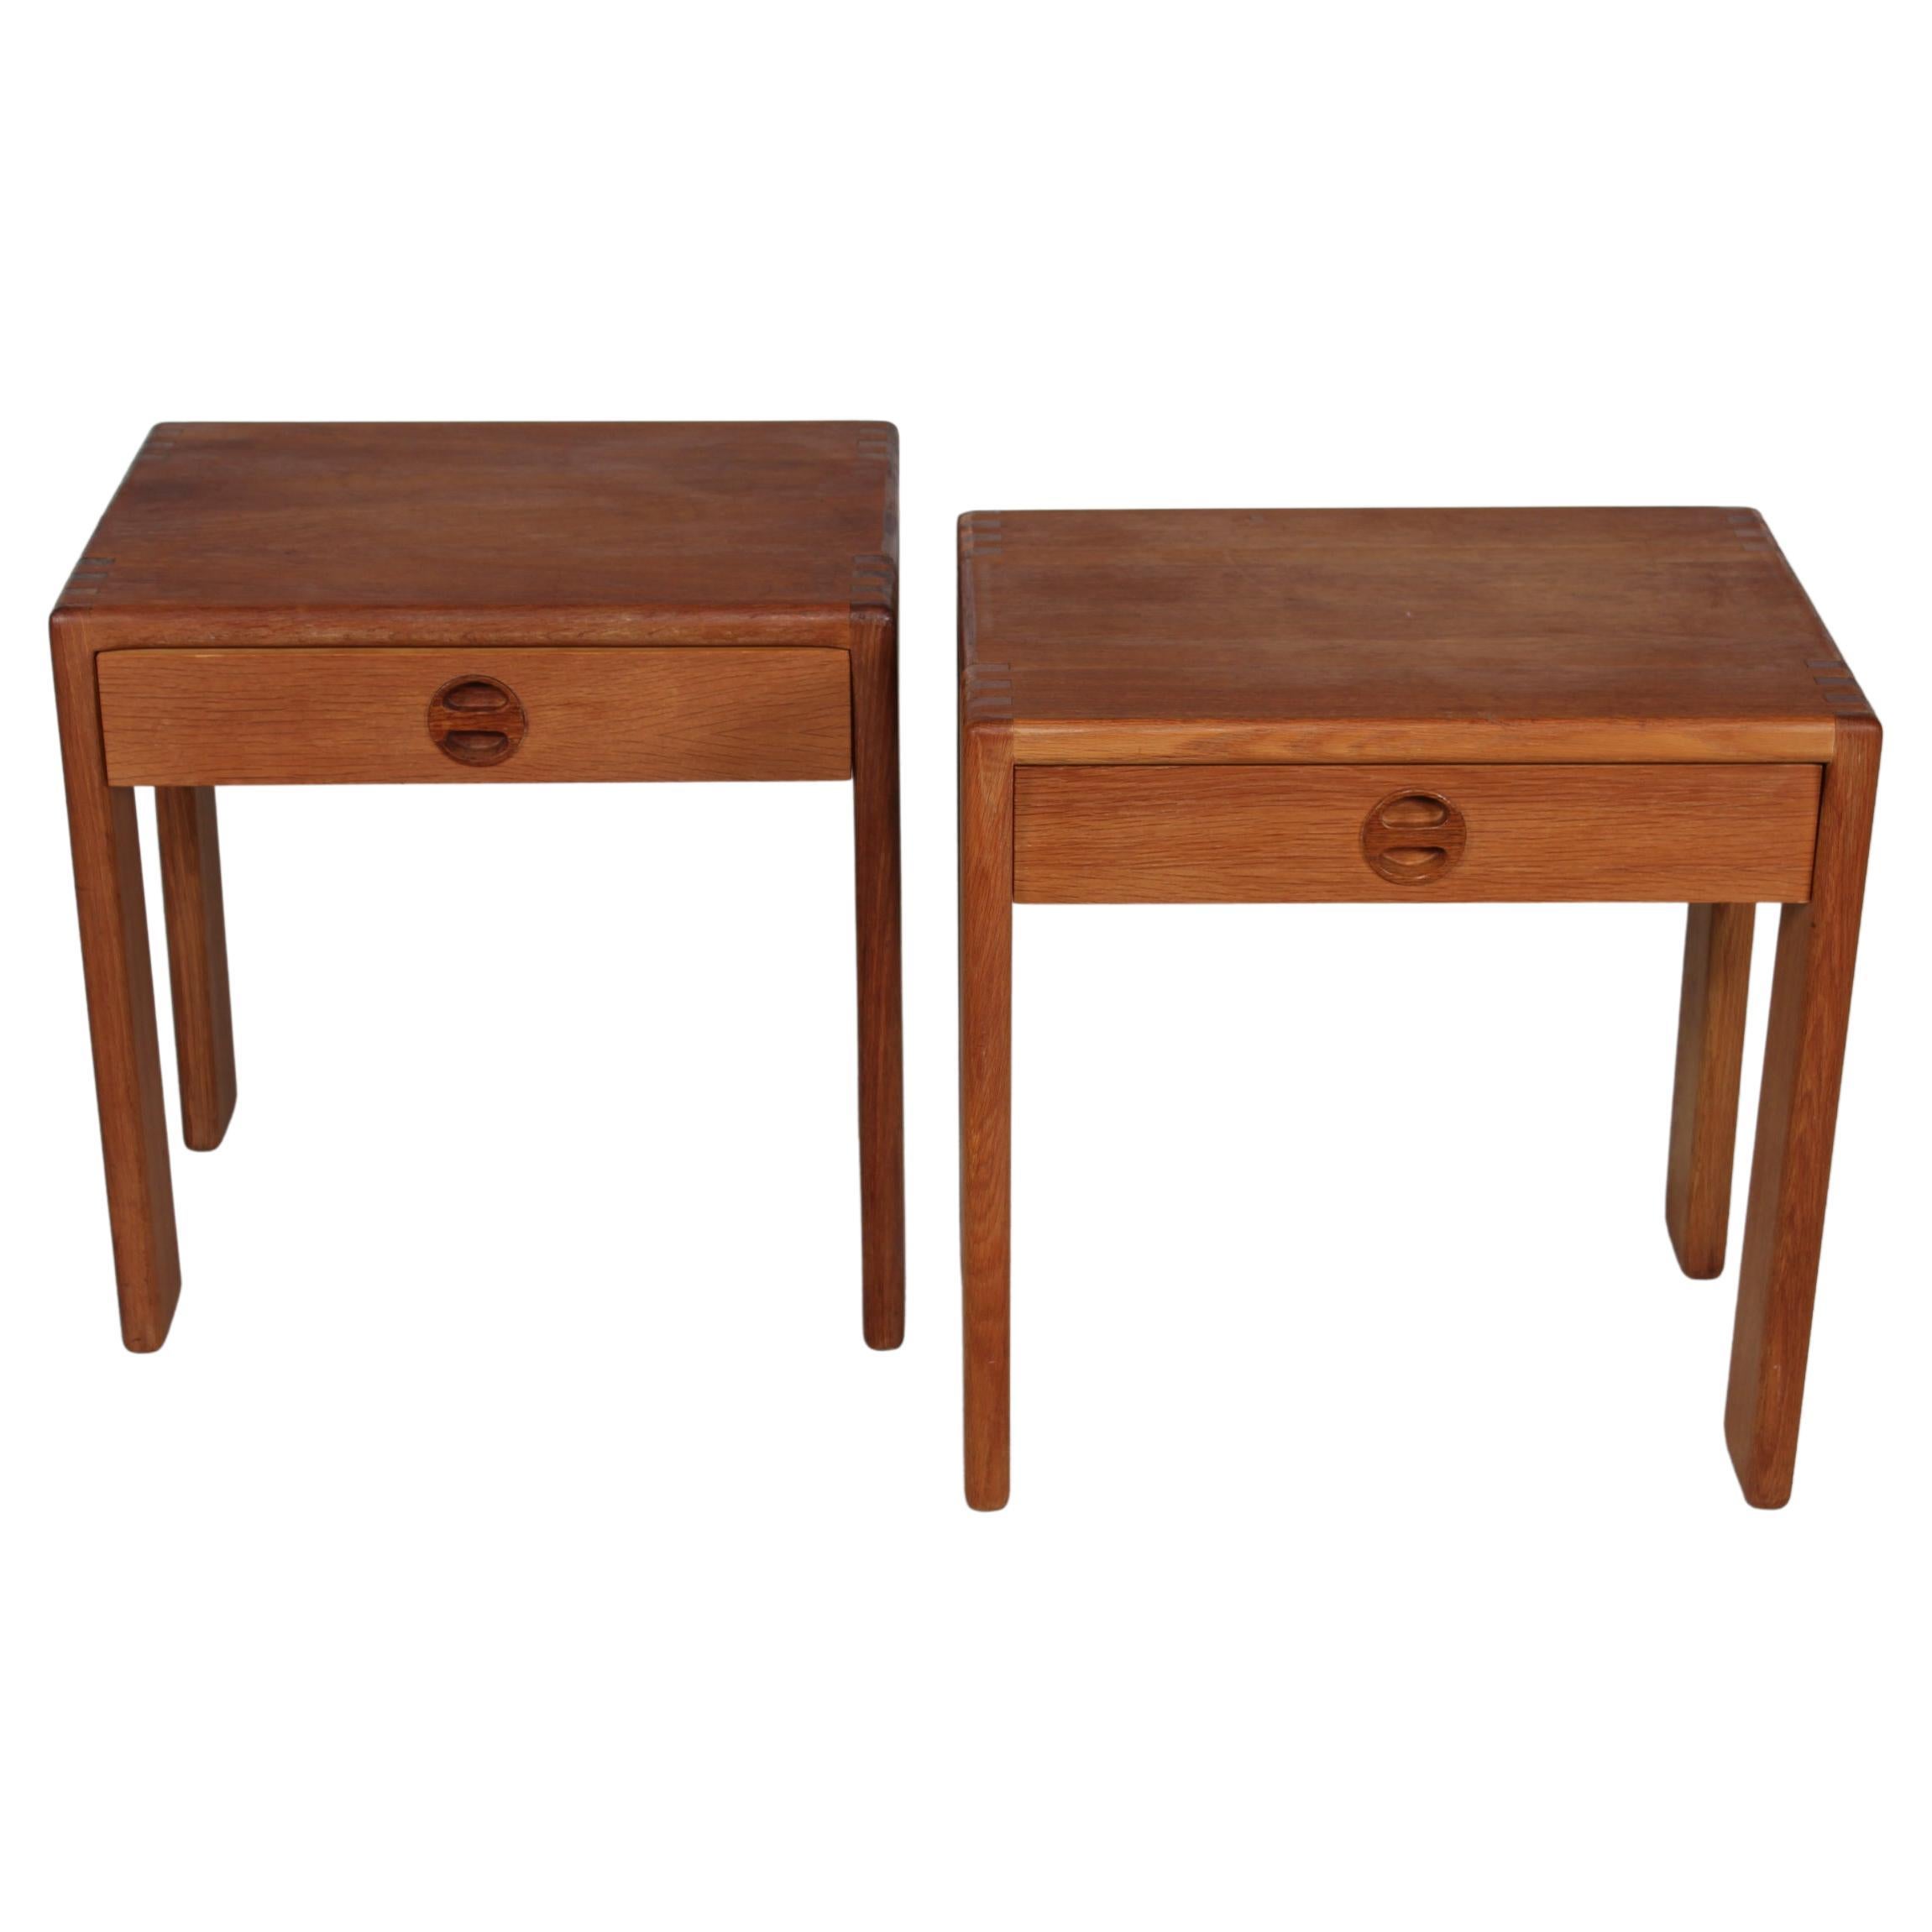 Mid-Century Modern pair of nightstands by Finnish designer Esko Pajamies for Asko Finland. Made circa 1960s to 1970s.

The nightstands are not identical but very similar.

They are partly made from solid oak and parts with oak veneer. The decorative